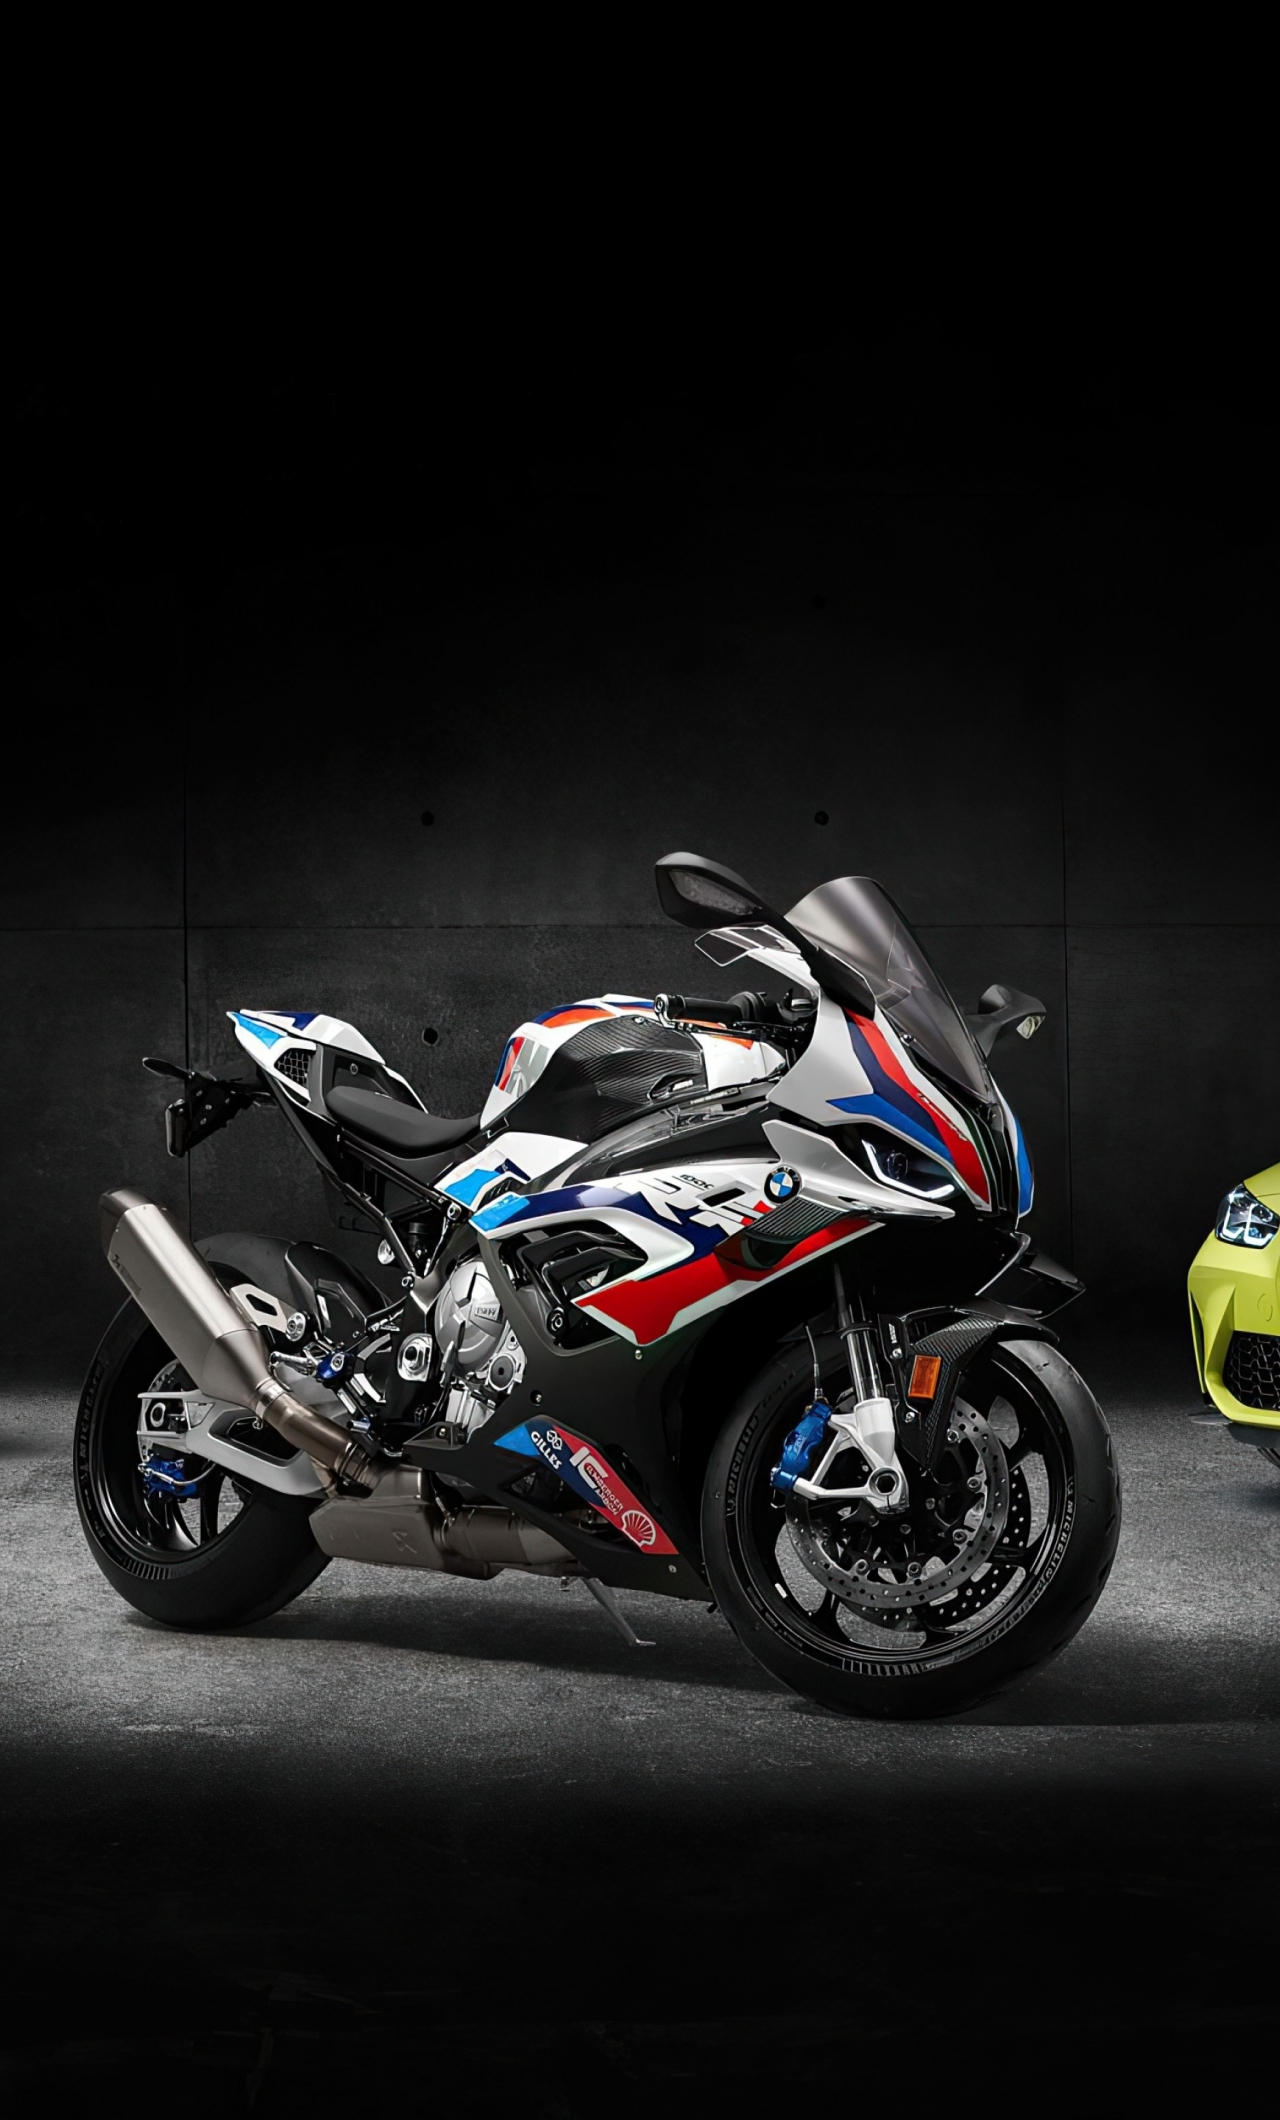 Download wallpaper 1280x2120 bmw squad, bike and cars, iphone 6 plus,  1280x2120 hd background, 26447